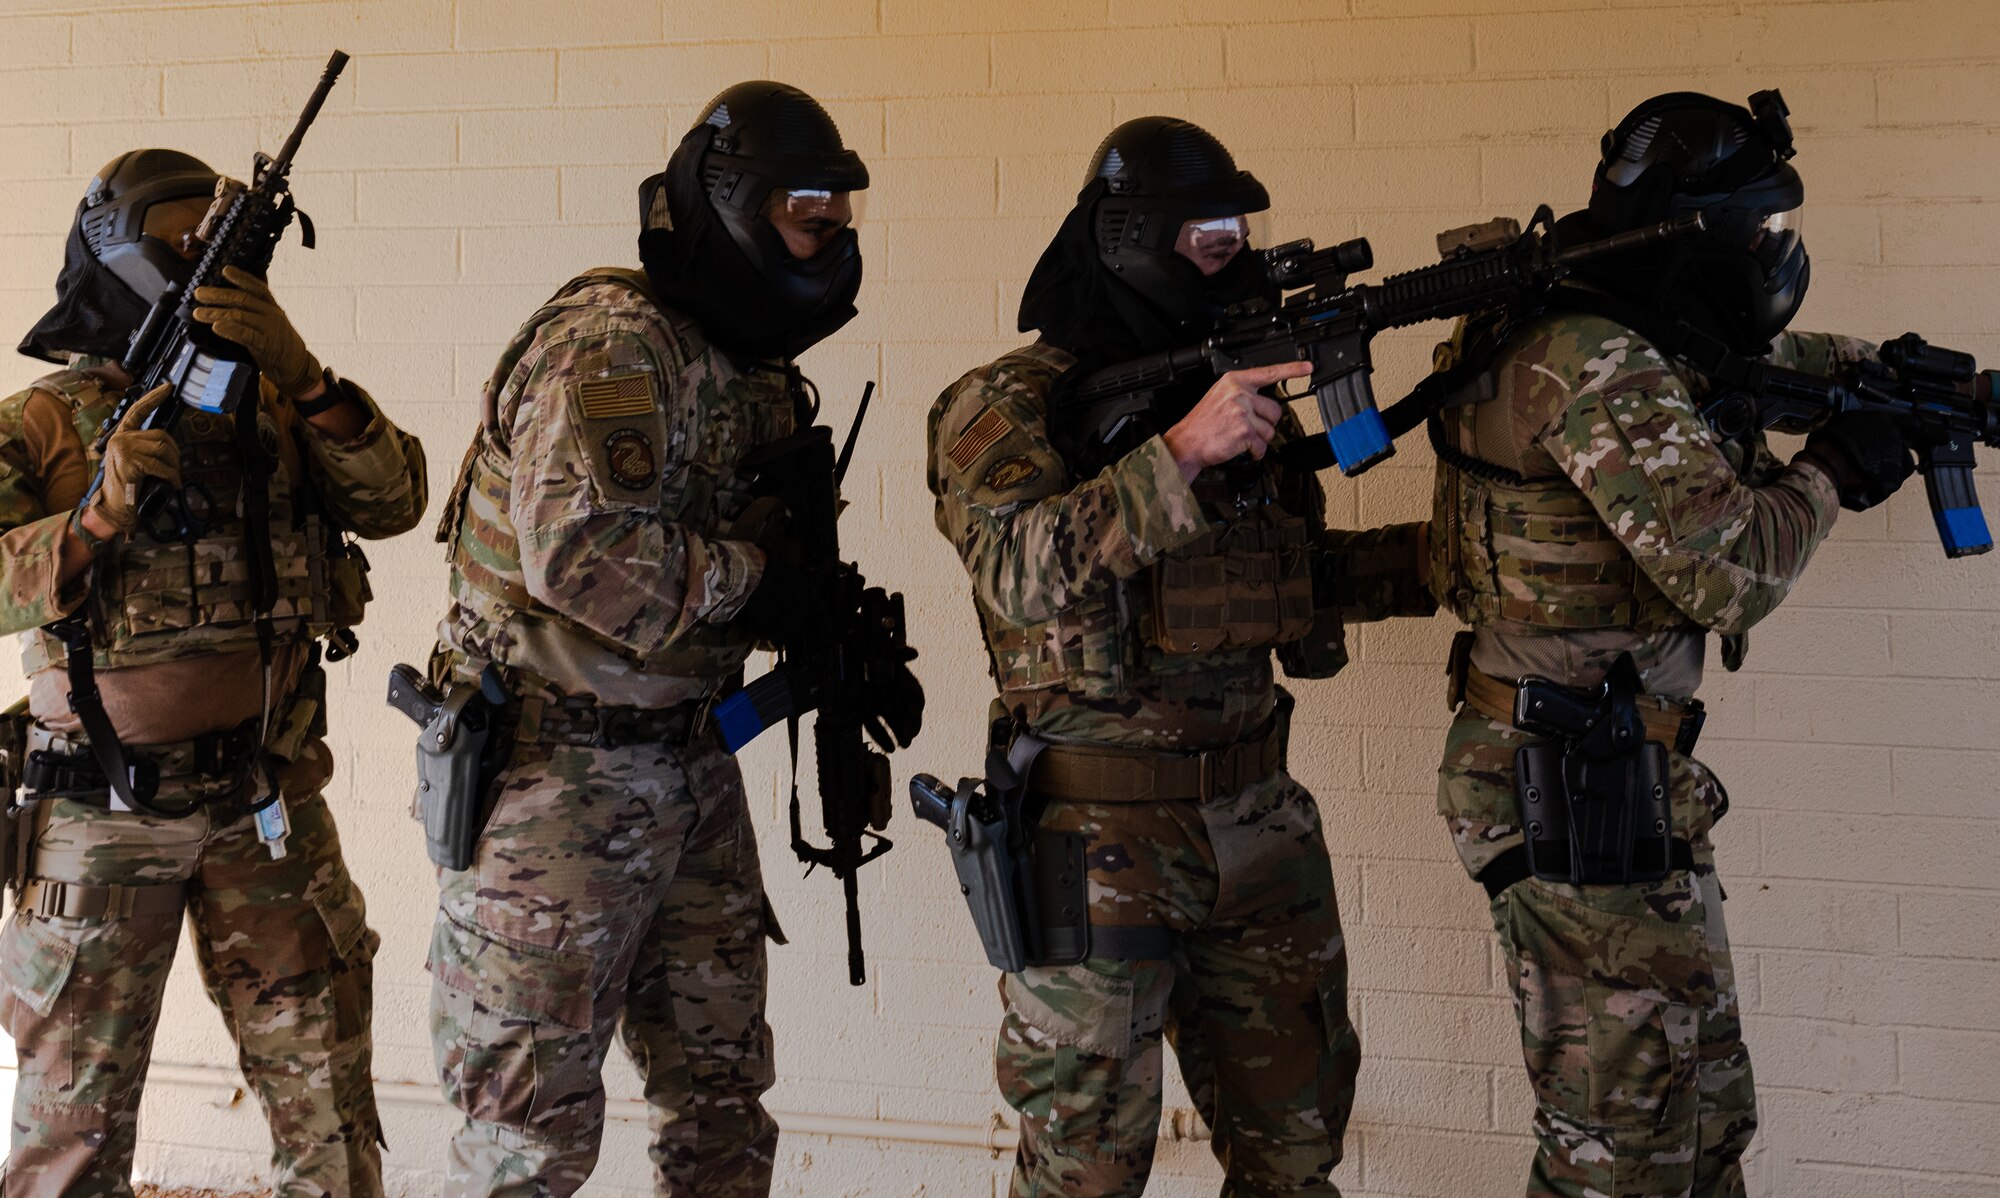 Airmen from the 56th Security Forces Squadron participate in a barricaded suspect demo May 14, 2021, at Luke Air Force Base, Arizona.